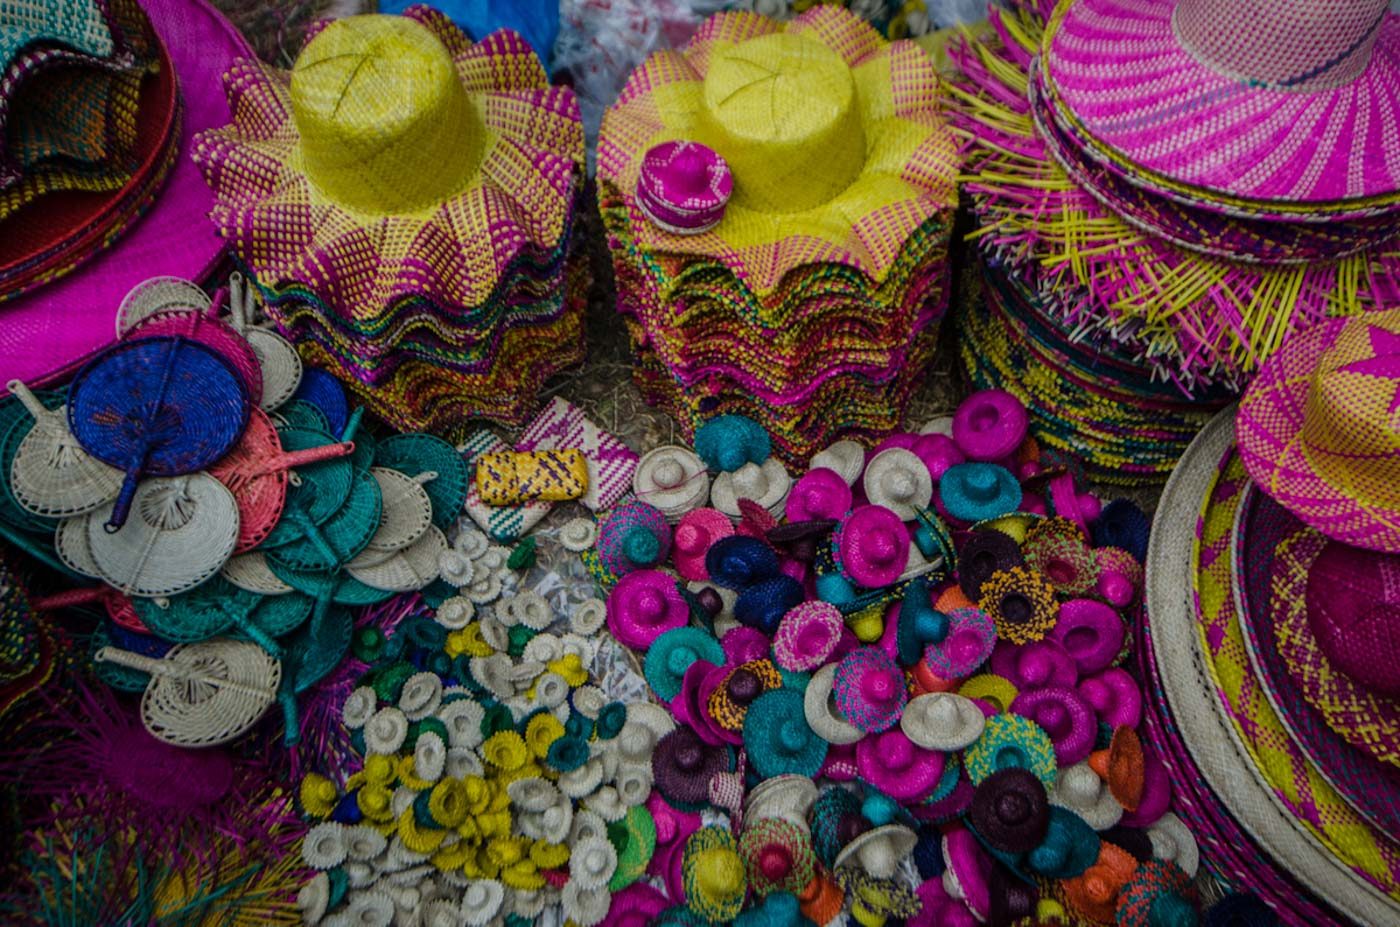 COLORFUL SOUVENIRS. Hats and abanico fans can be bought by tourists for pasalubong 